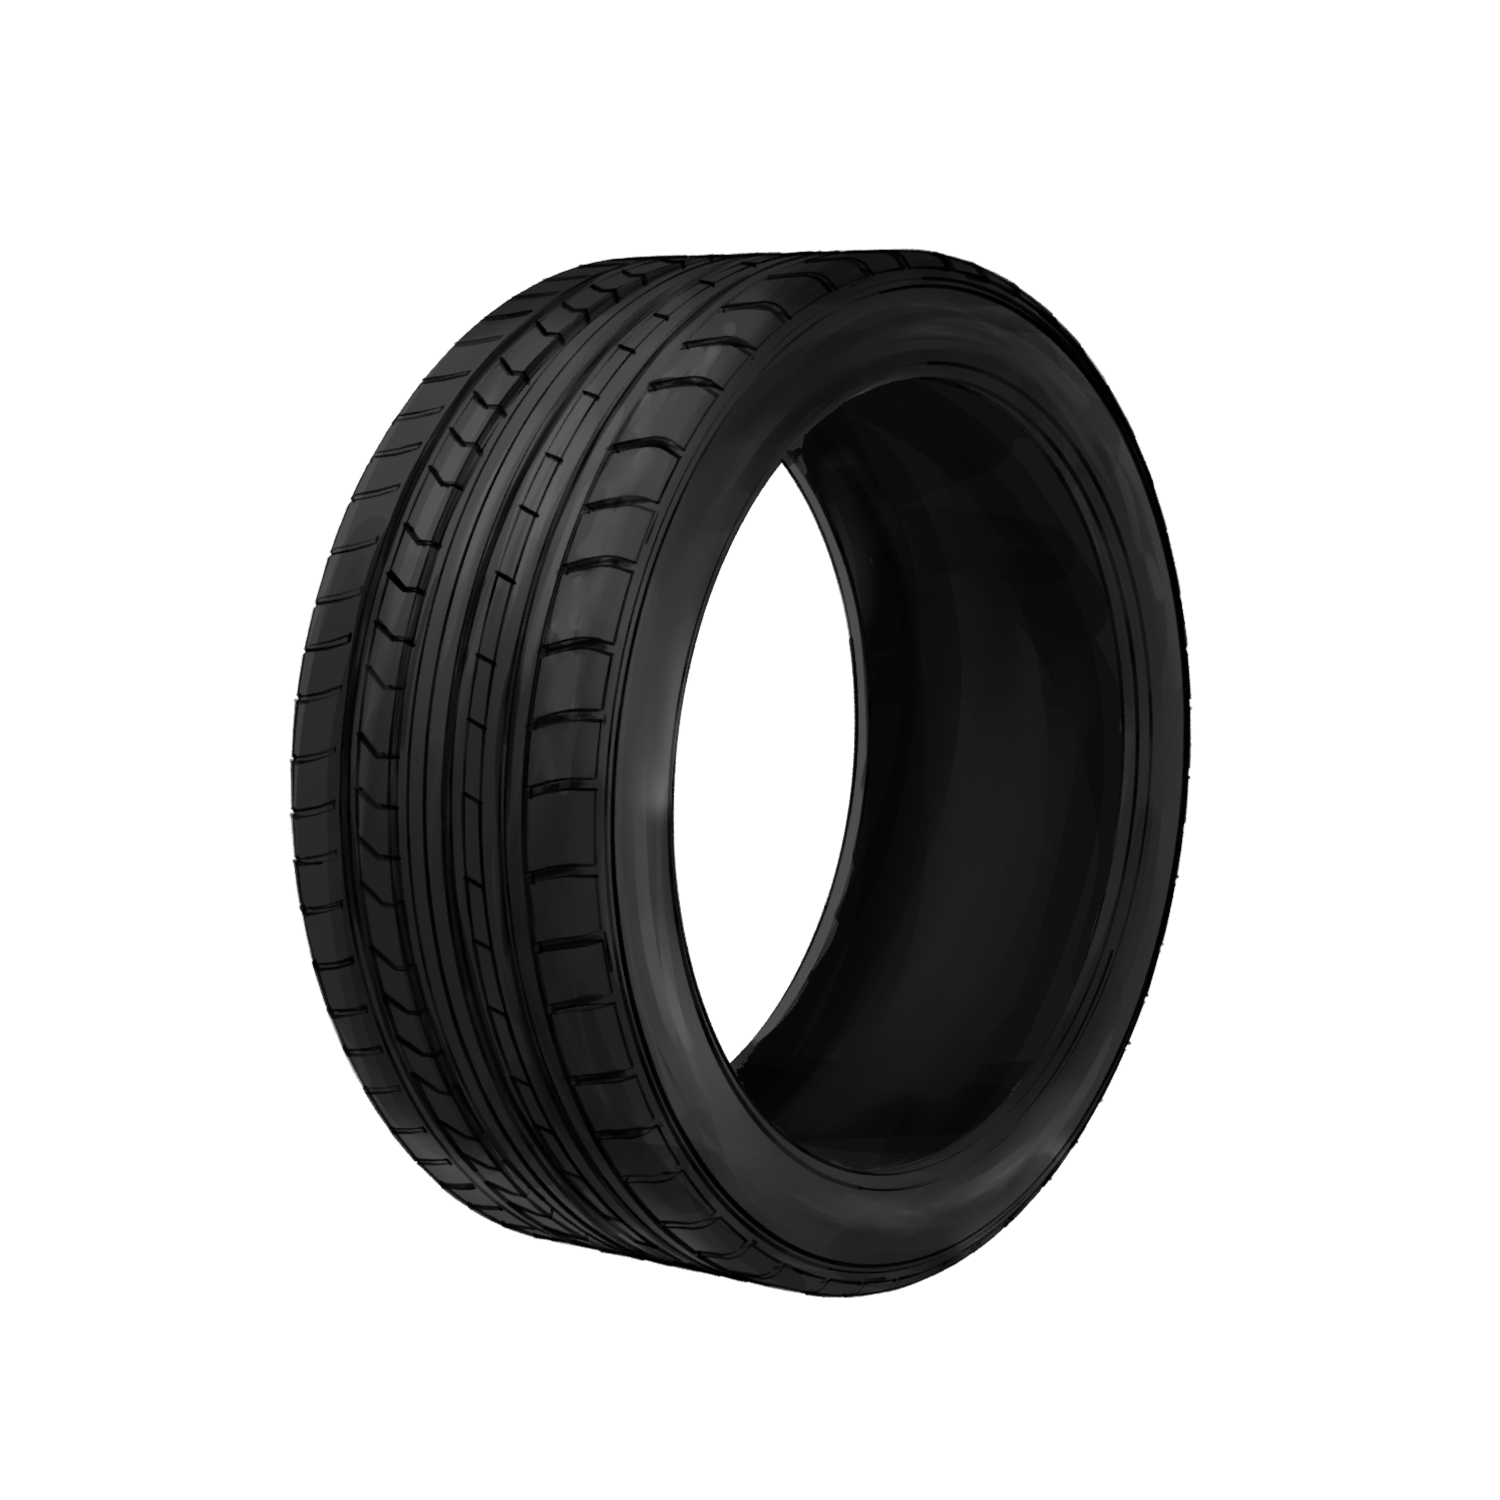  Product image 1 of the product “Tyre Flatliner ”